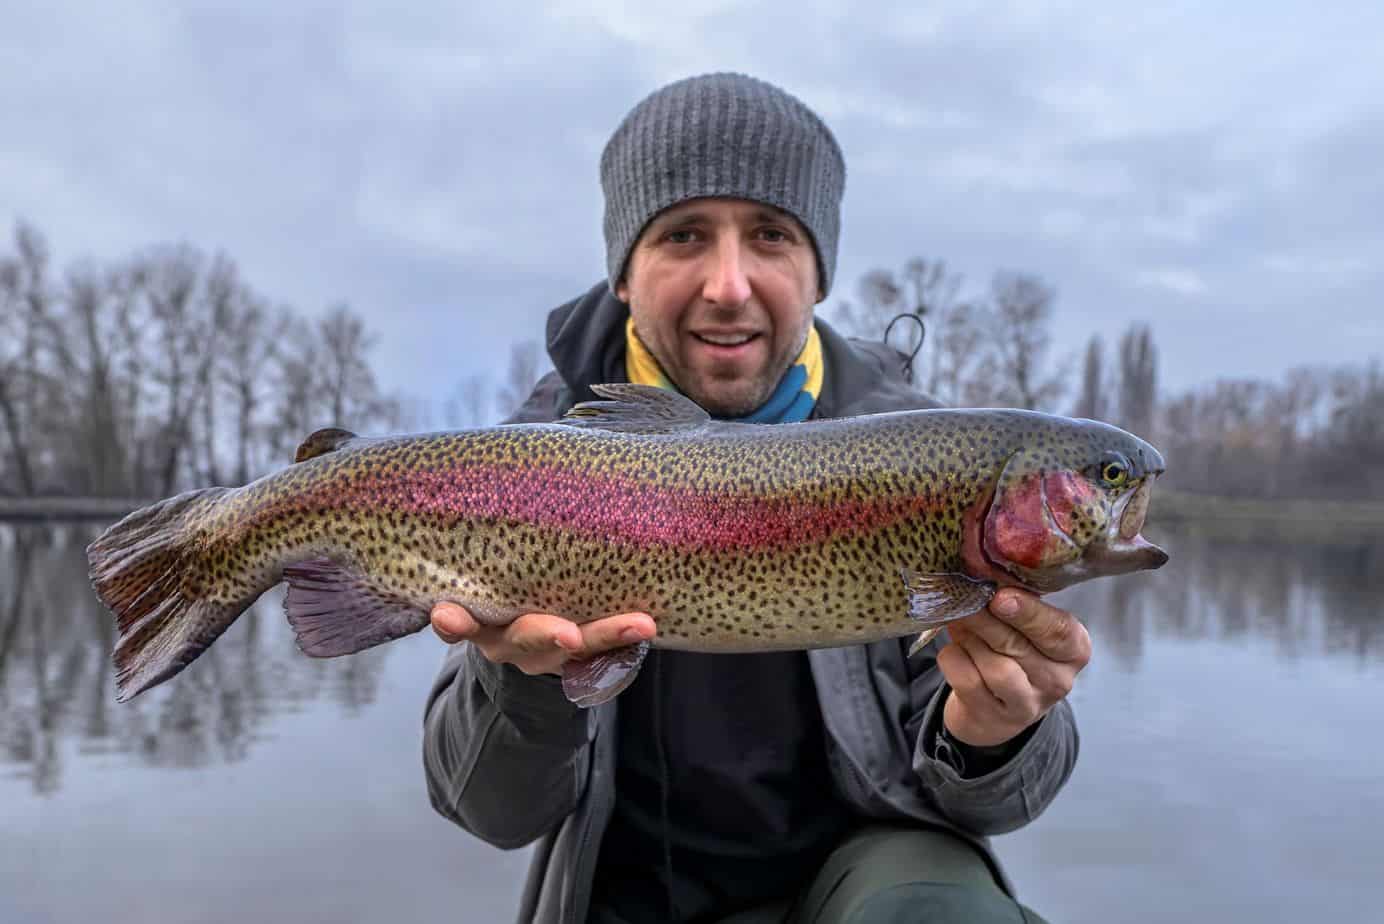 WhatпїЅs The Difference Between Steelhead And Rainbow